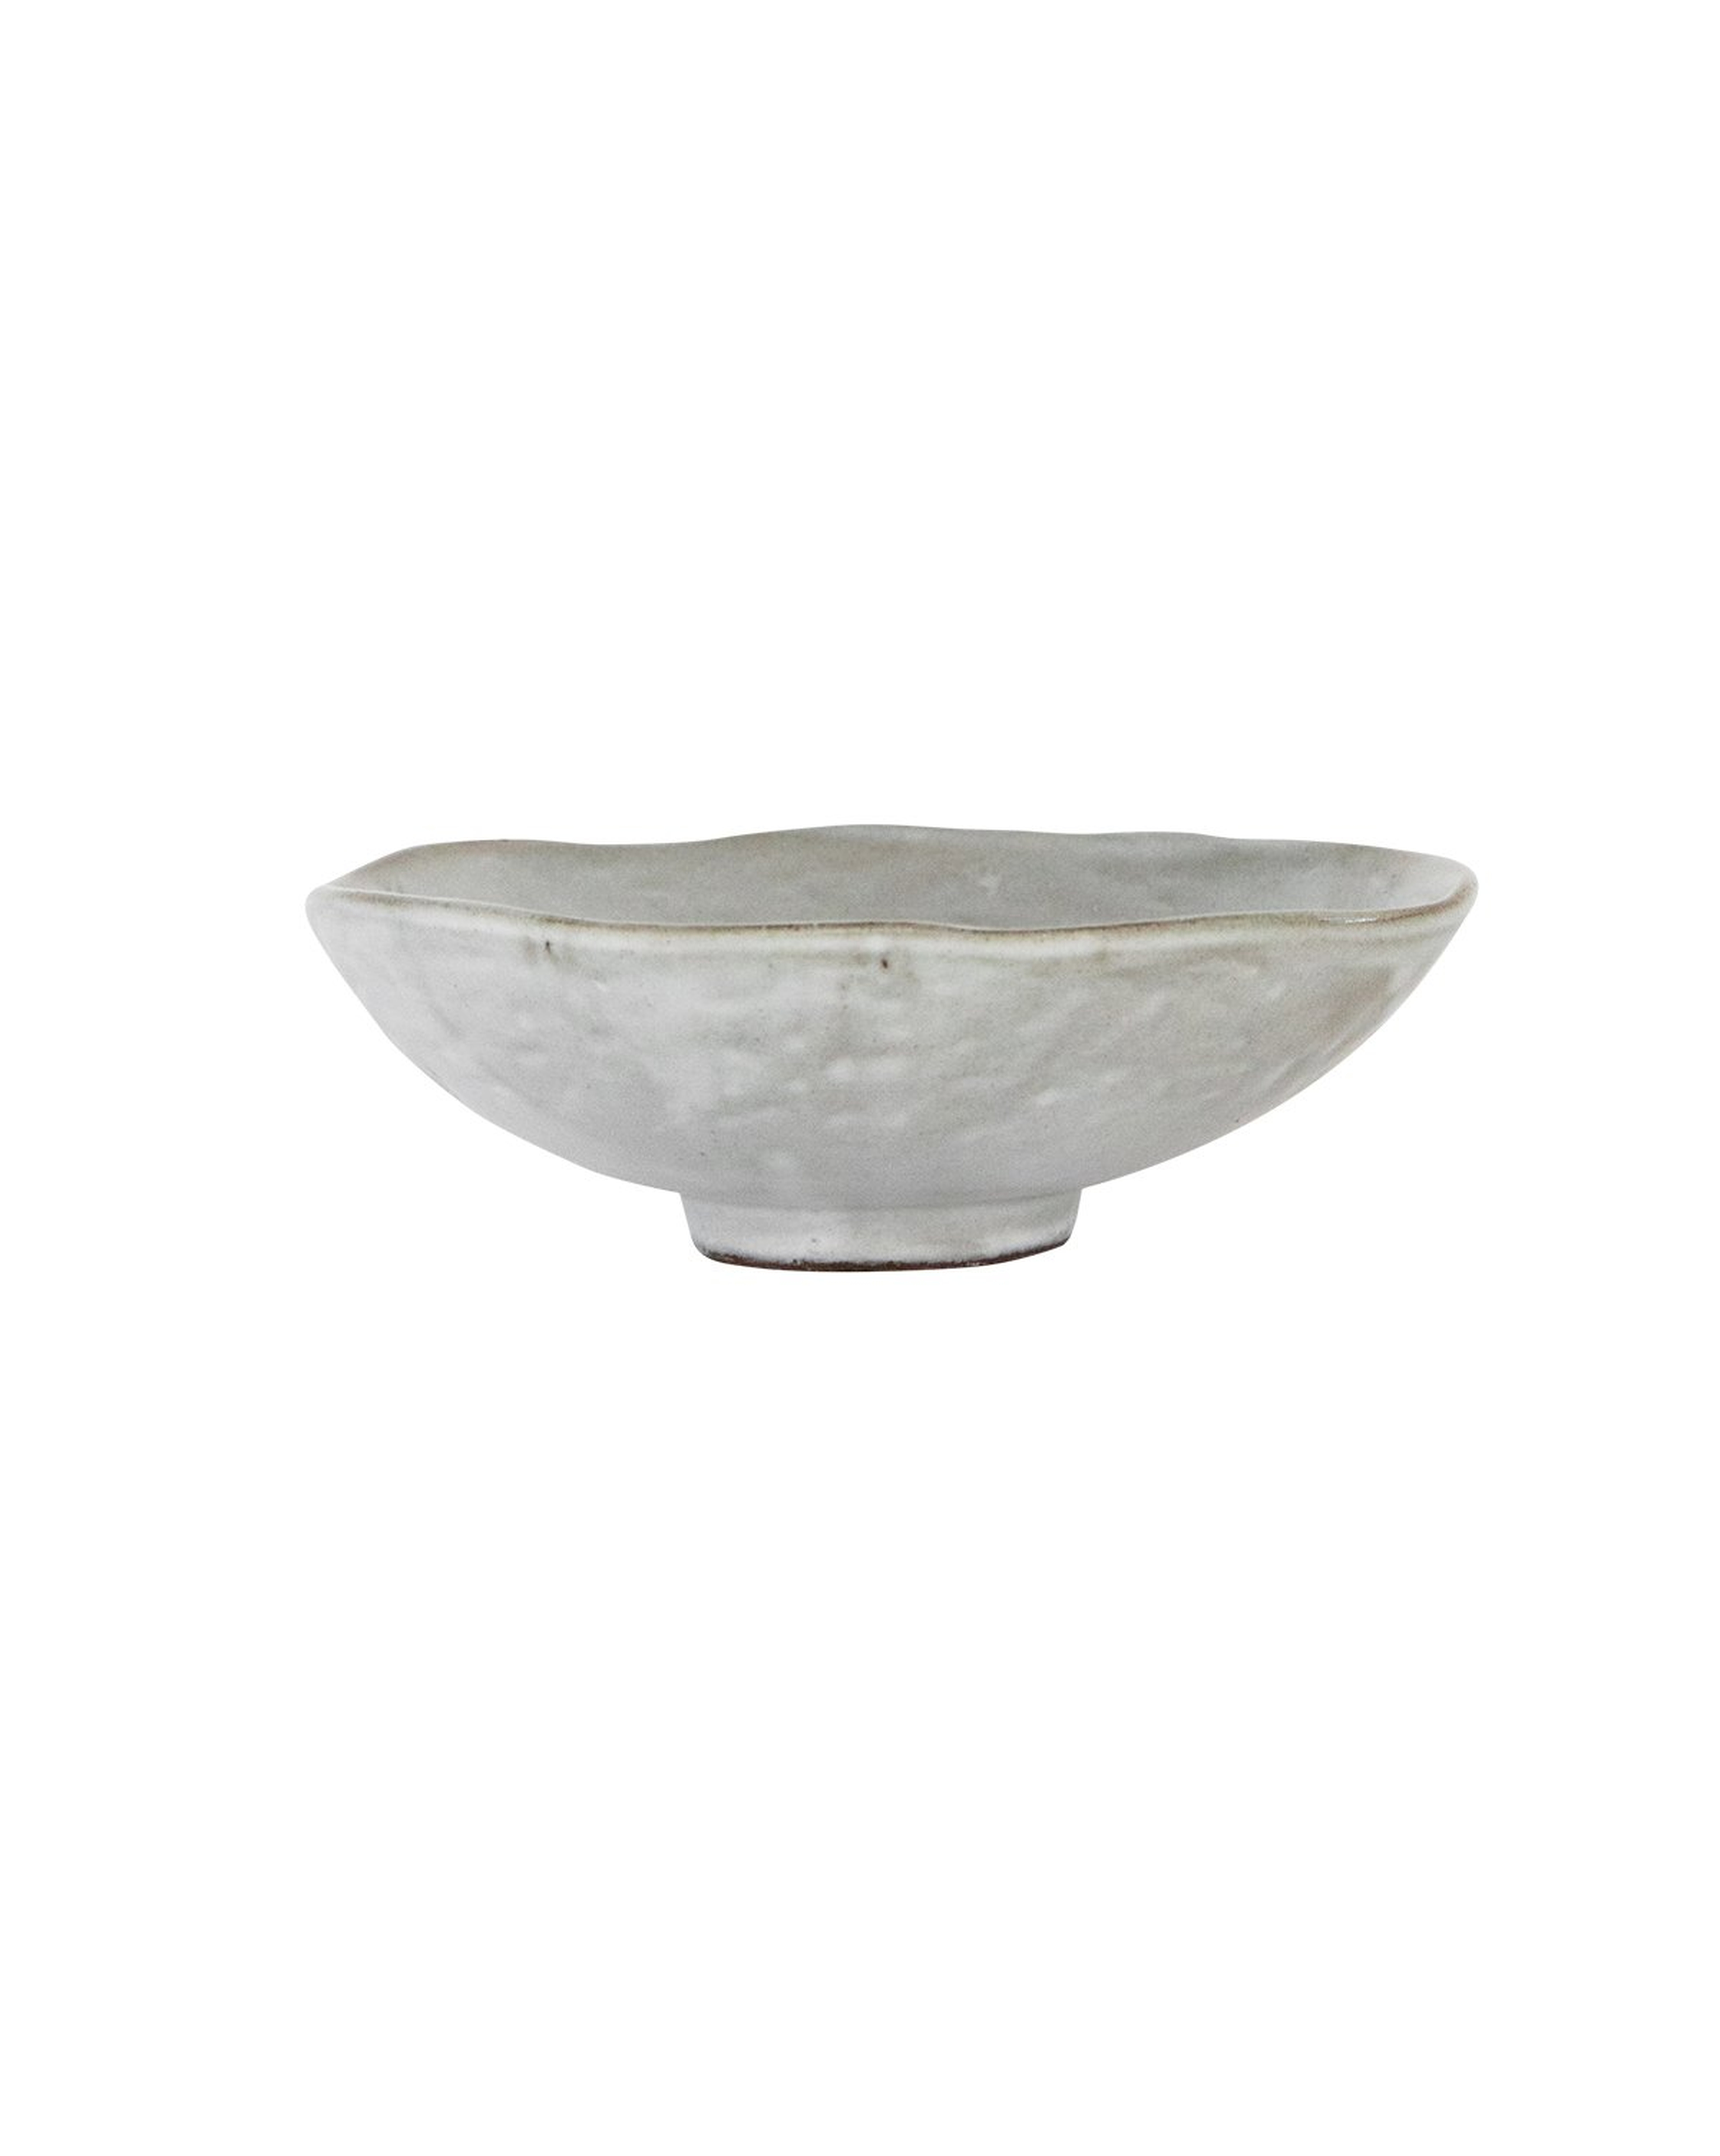 DIMPLED MATTE STONEWARE BOWL - McGee & Co.